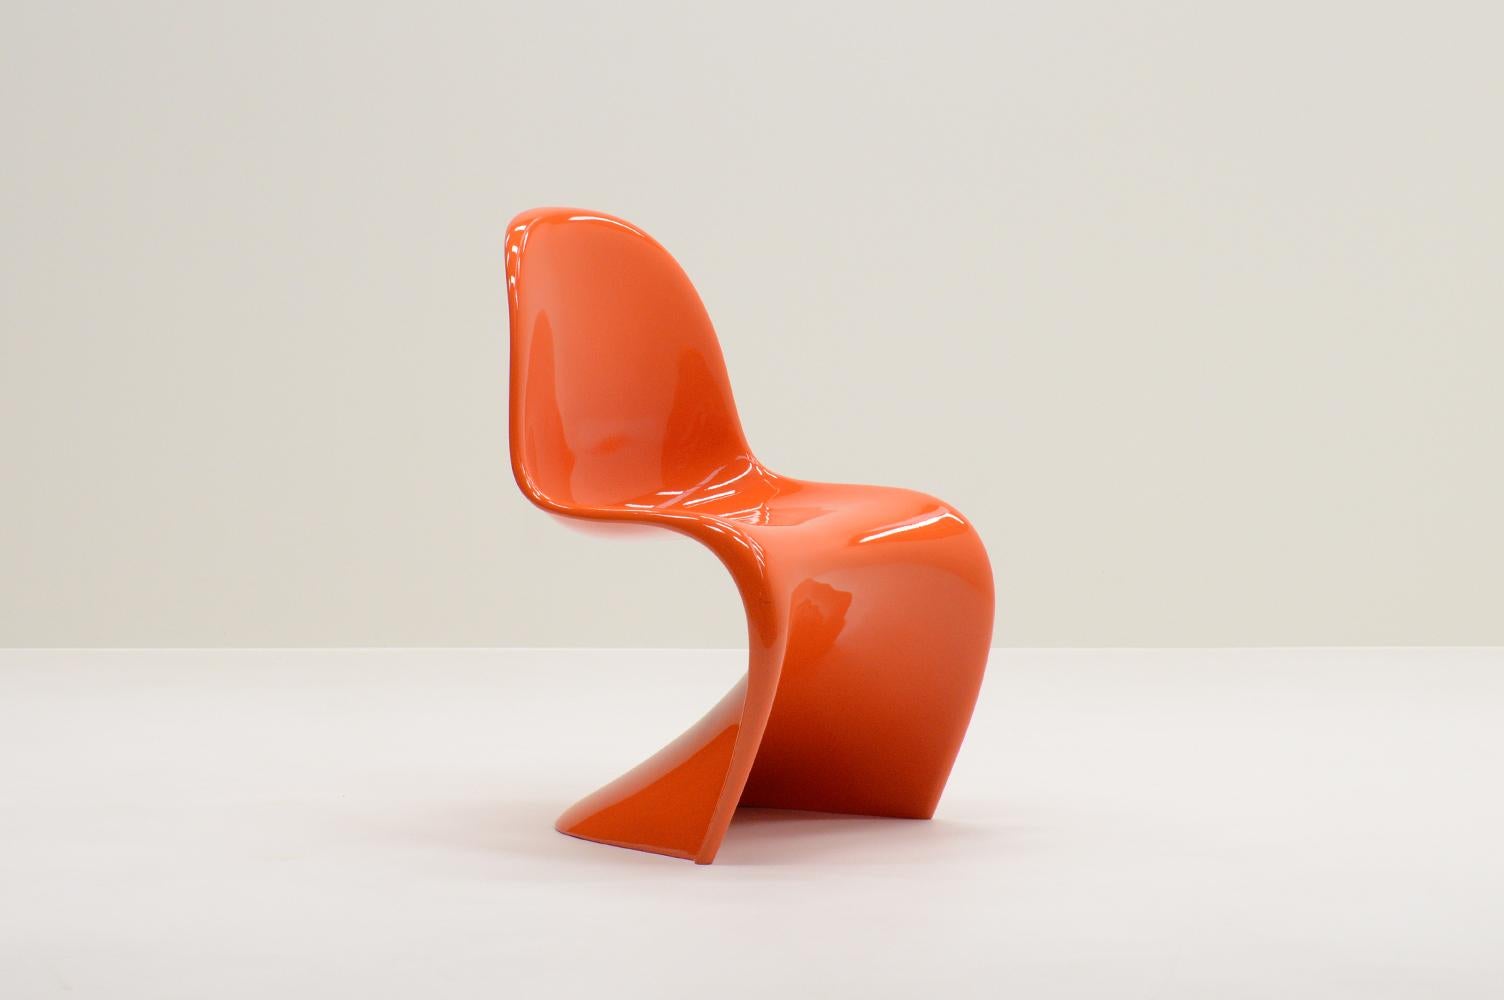 Rare 1st edition Panton chair by Verner Panton for Herman Miller 1968. The design concept for a stackable chair in one molded piece started in the 50’s. With the help of Willi Fehlbaum the first Panton production chairs came on the market in 1968.